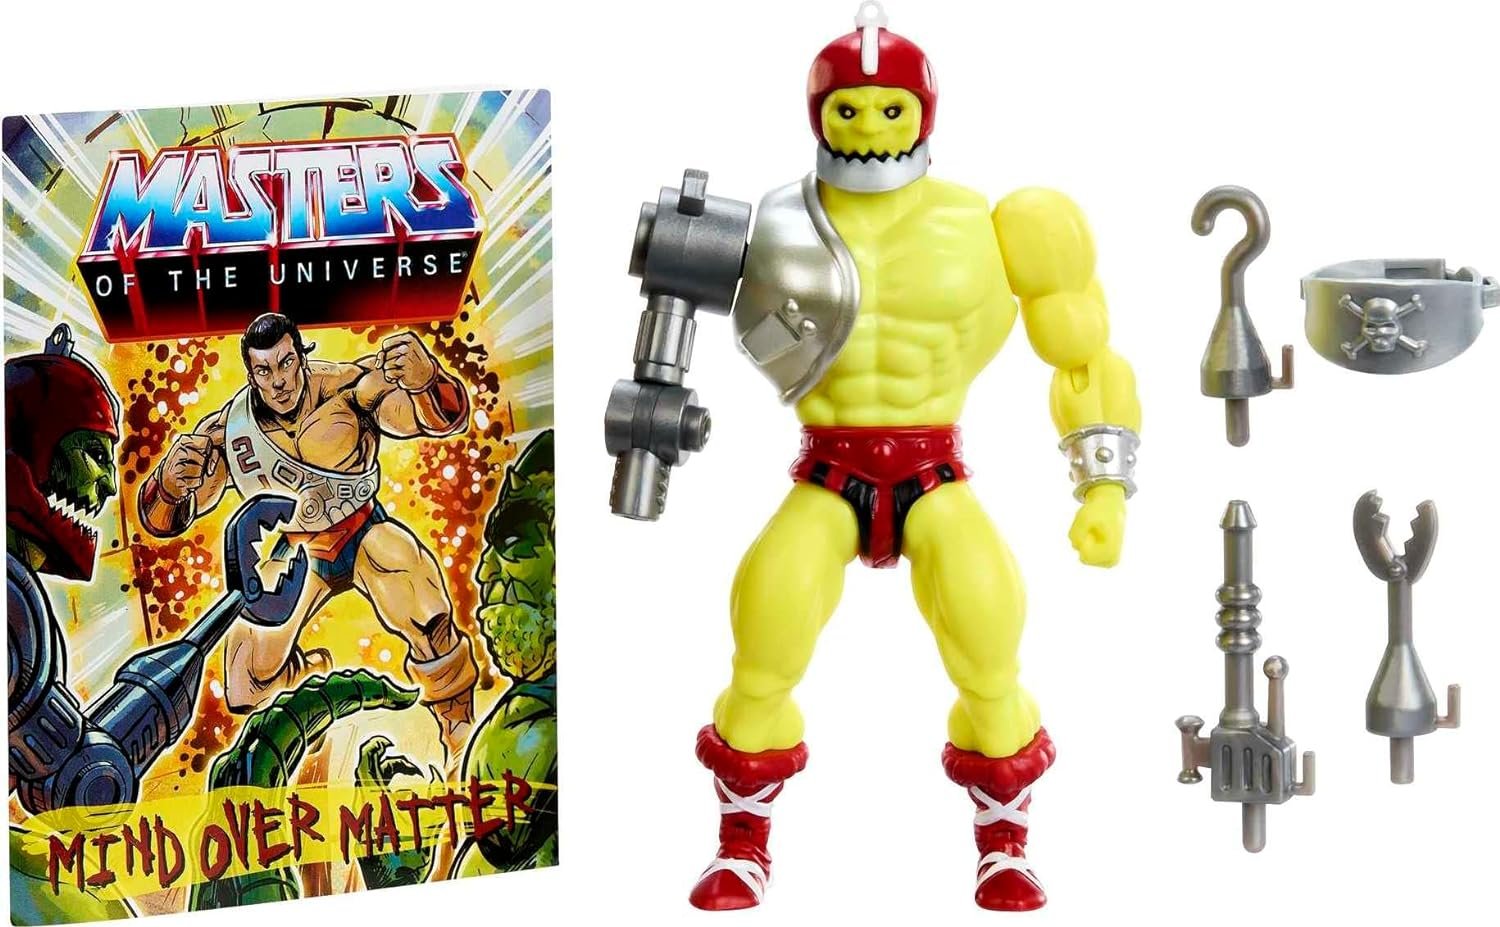 Masters of the Universe Origins Toy, Trap Jaw Action Figure, Posable with Mini Comic Book, MOTU Collectible